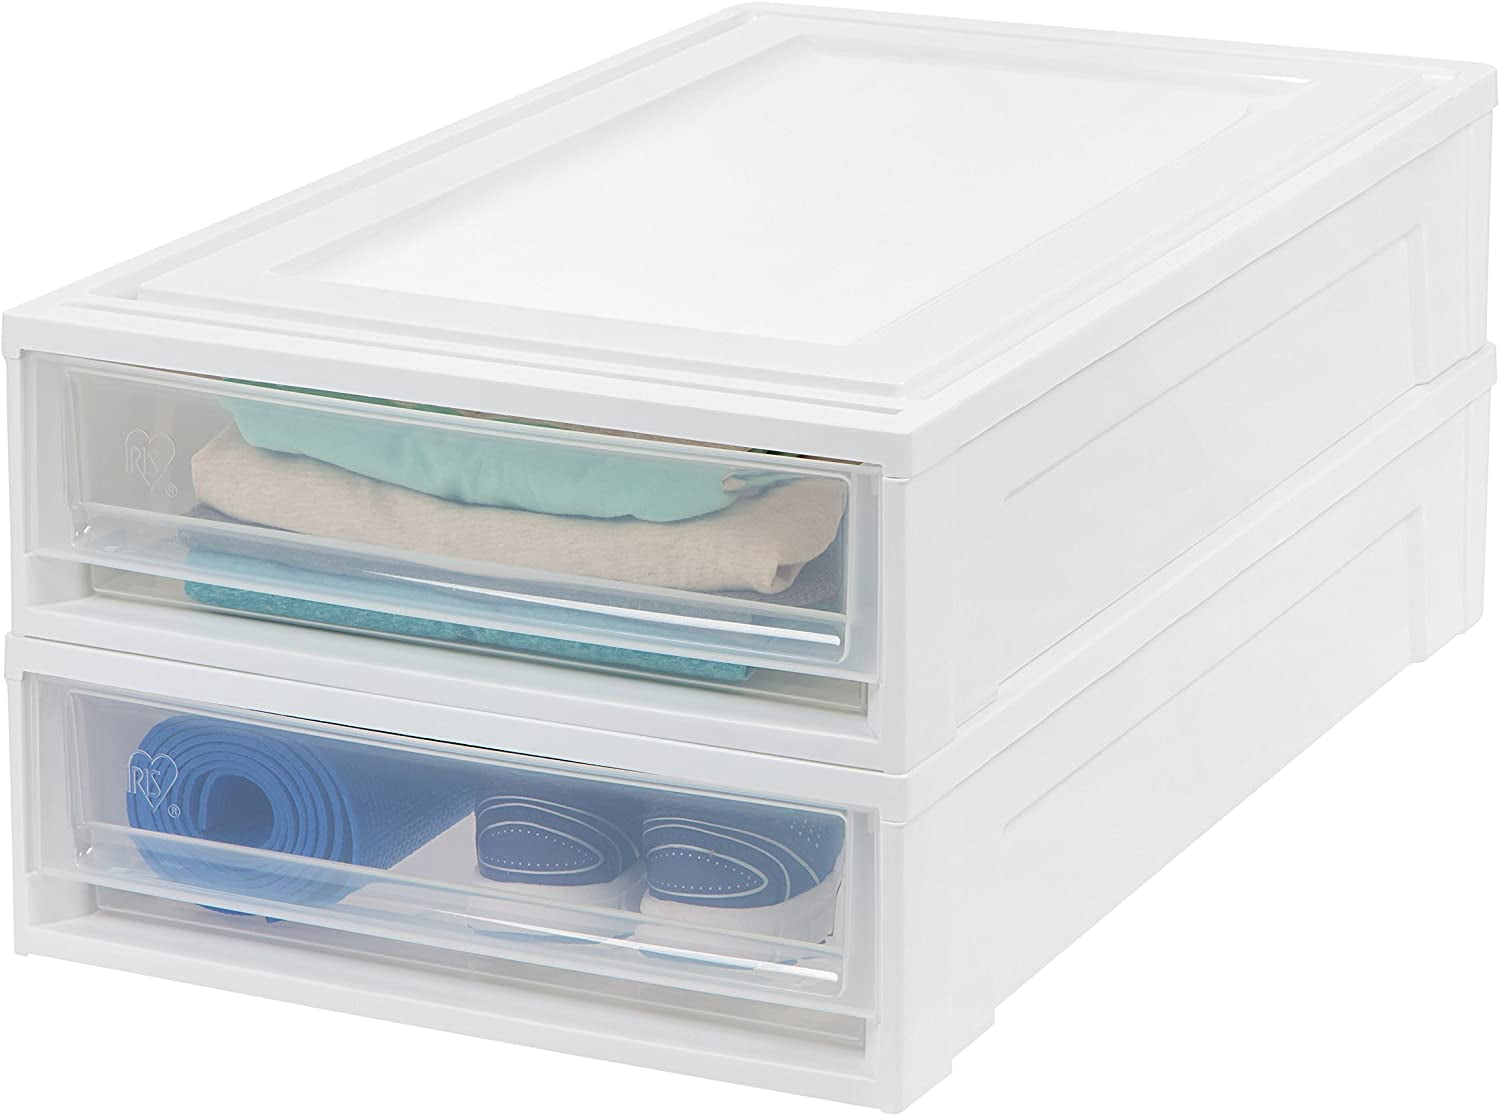 Stacking Drawer 2021 Edition IRIS USA BC-UB Underbed Storage White/Natural Clear 2 Pack 27 Quart